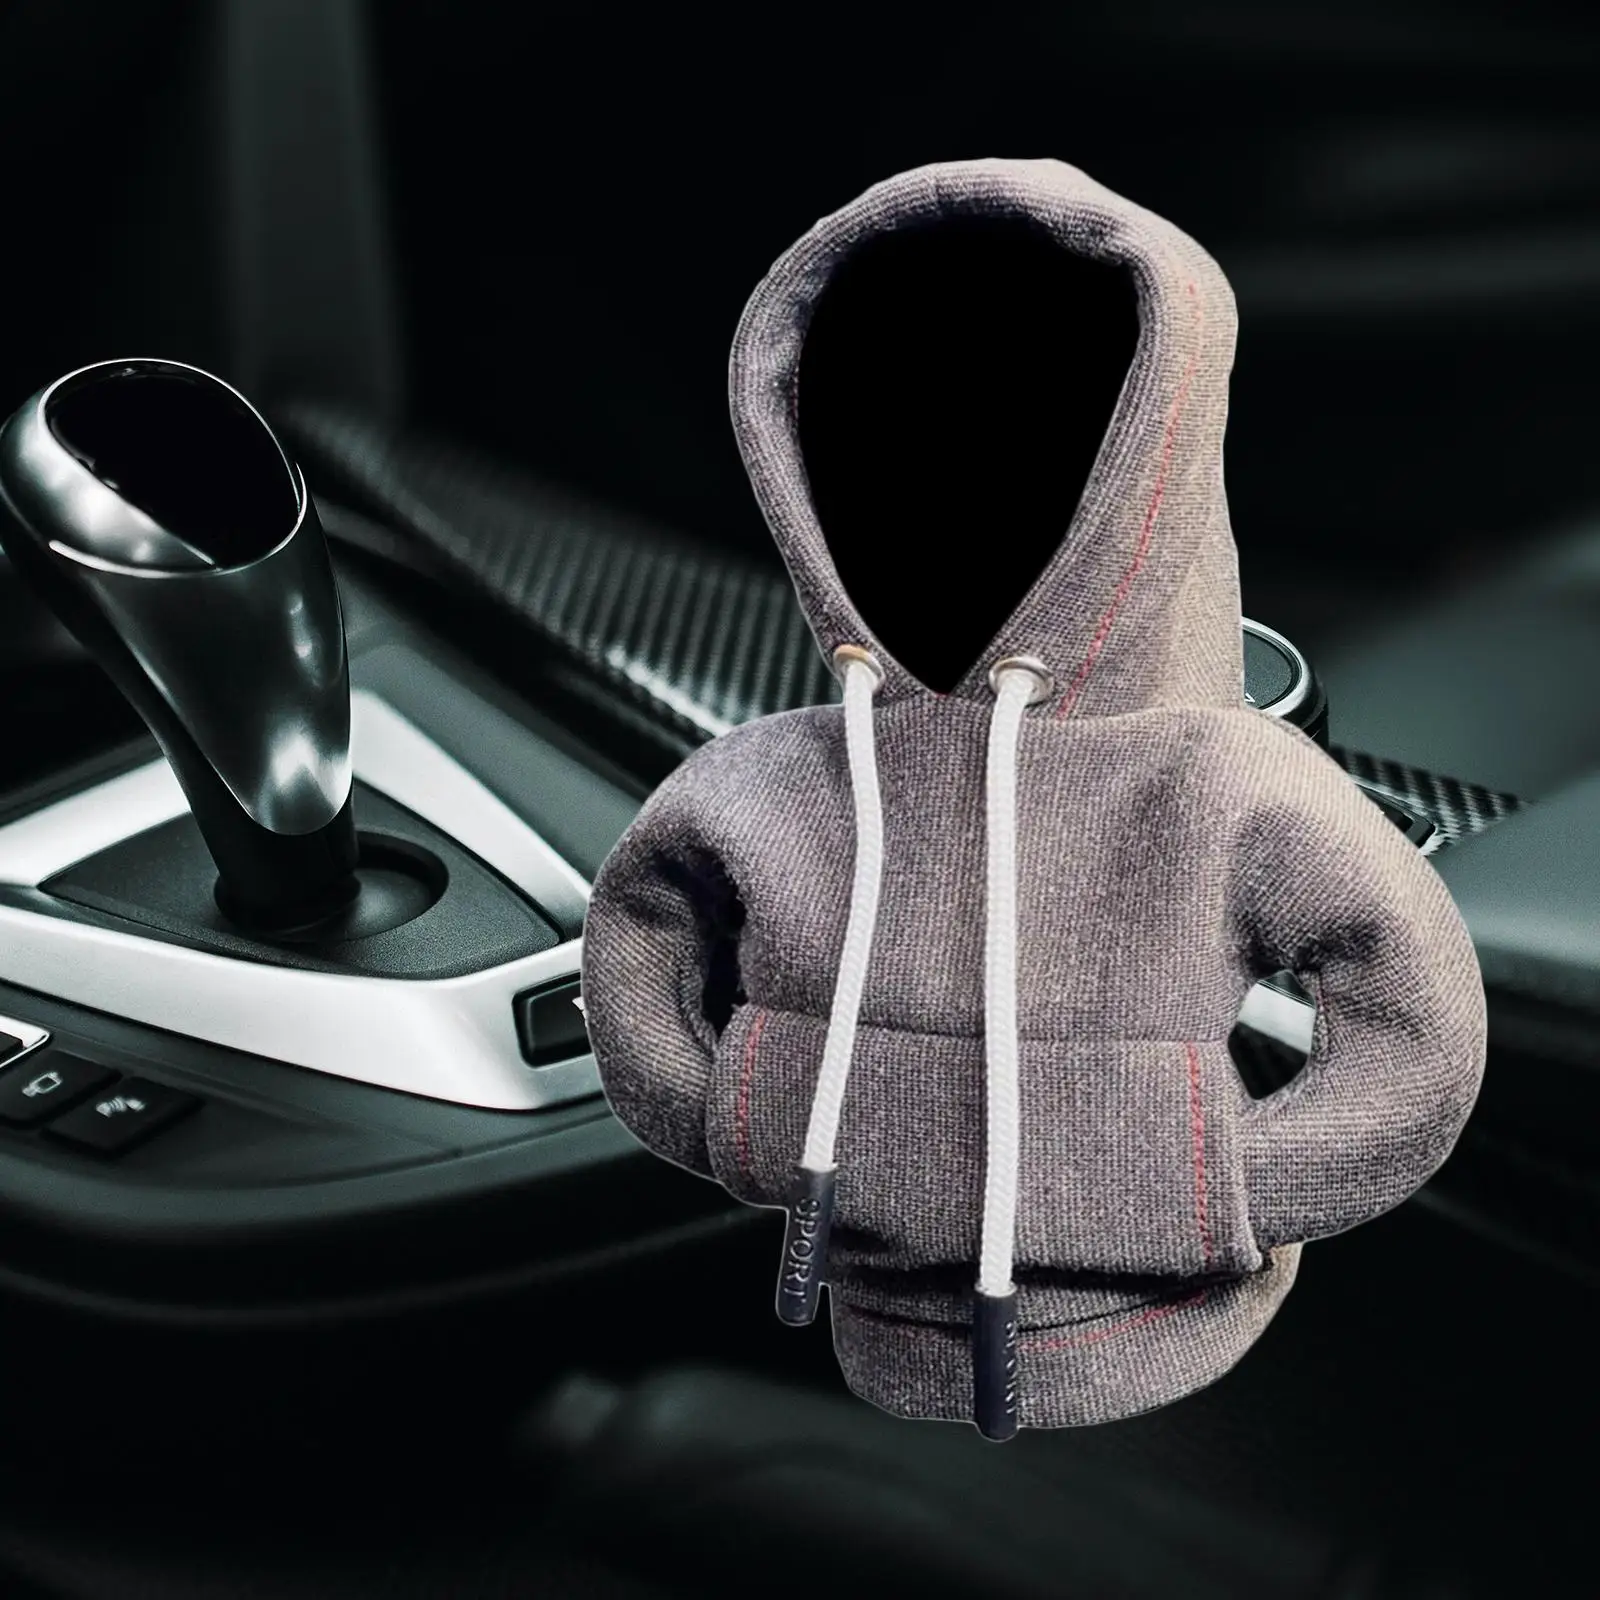 Automotive Gear Shifter Knob Cover Hoodie Sweatshirt Funny Accessories Mini Hoodie for Shifter Shifter Knob Hoodie Cover Sleeve